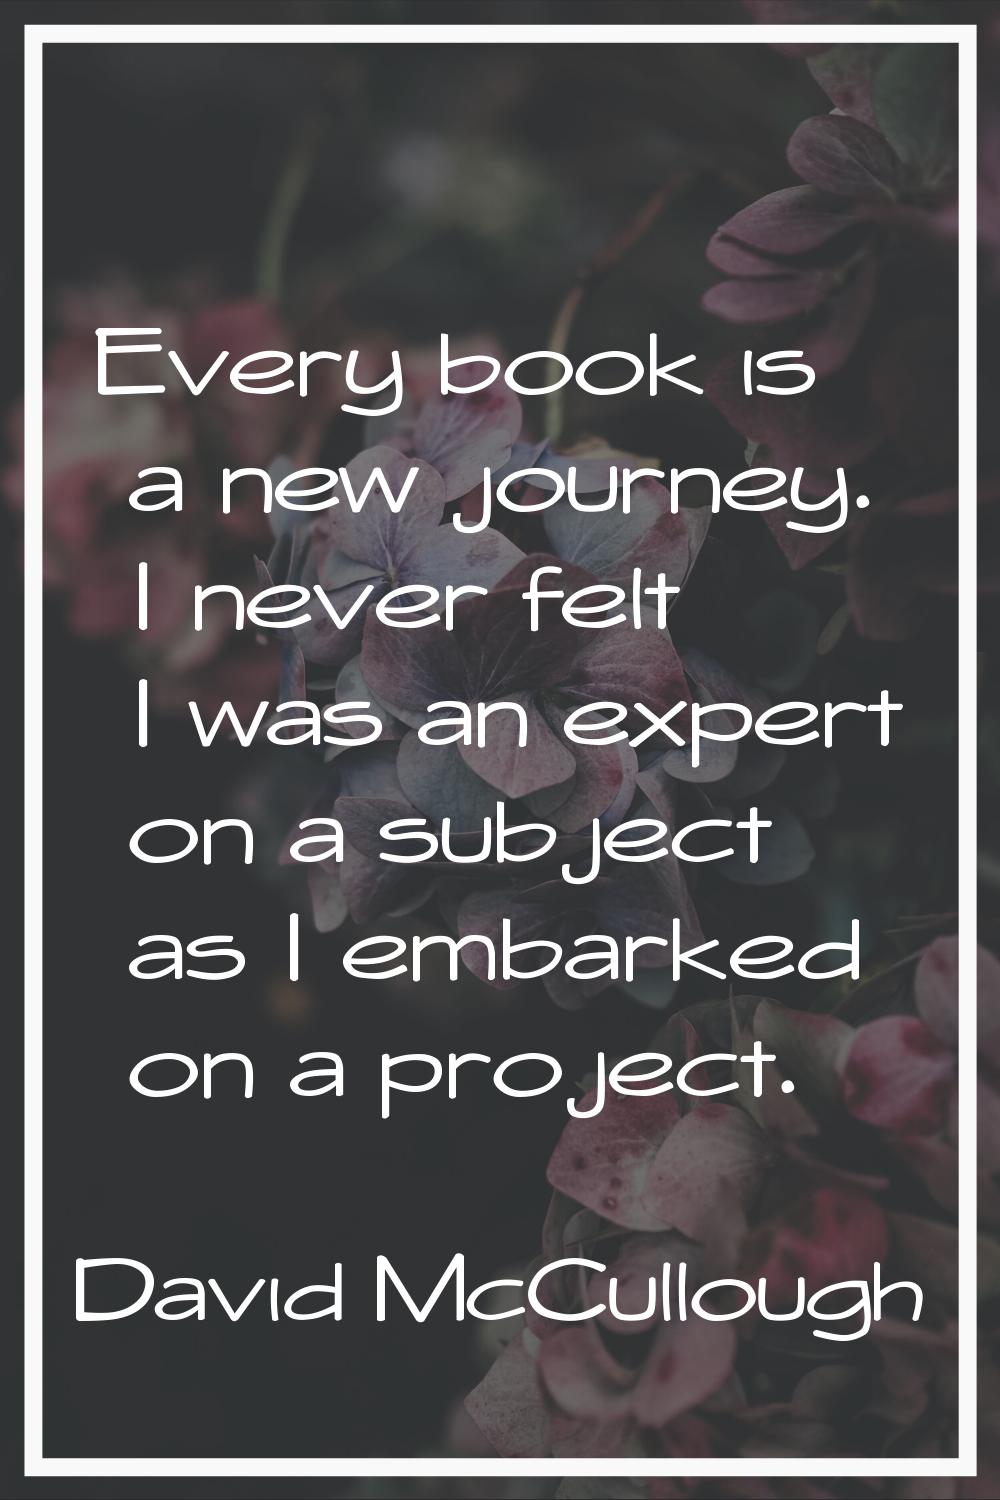 Every book is a new journey. I never felt I was an expert on a subject as I embarked on a project.